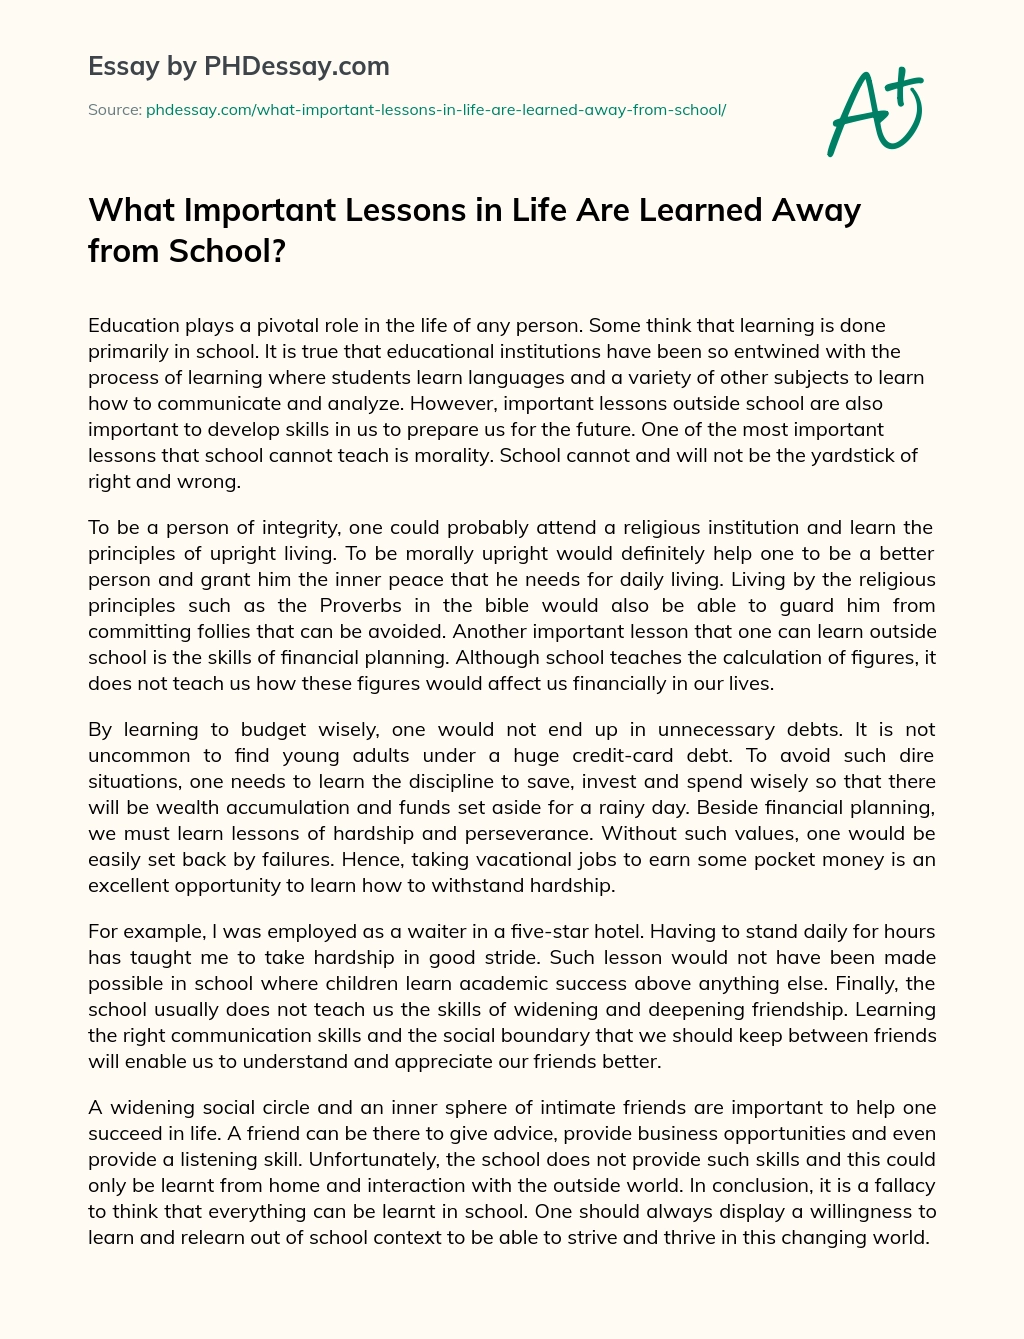 What Important Lessons in Life Are Learned Away from School? essay